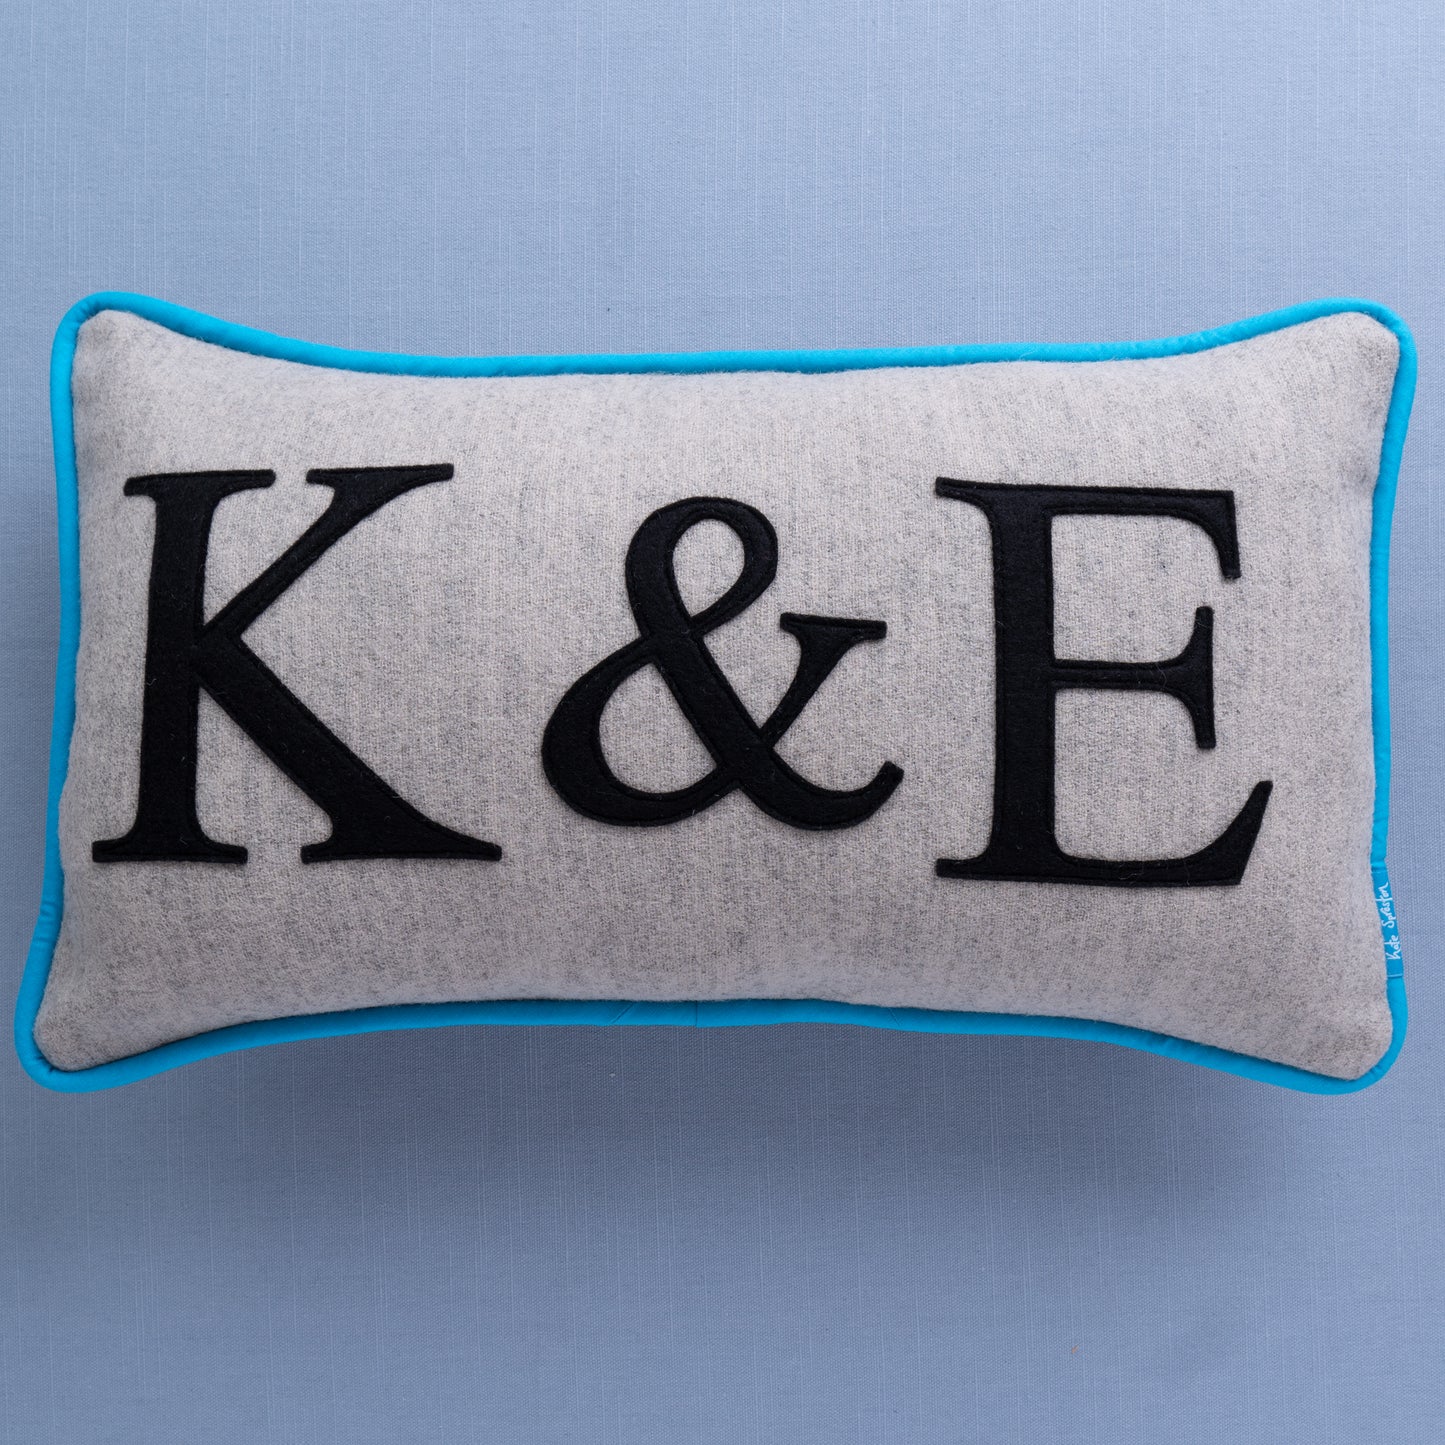 Sample - Couples Initials Cushion - Colour Flash Piping - Turquoise K&E